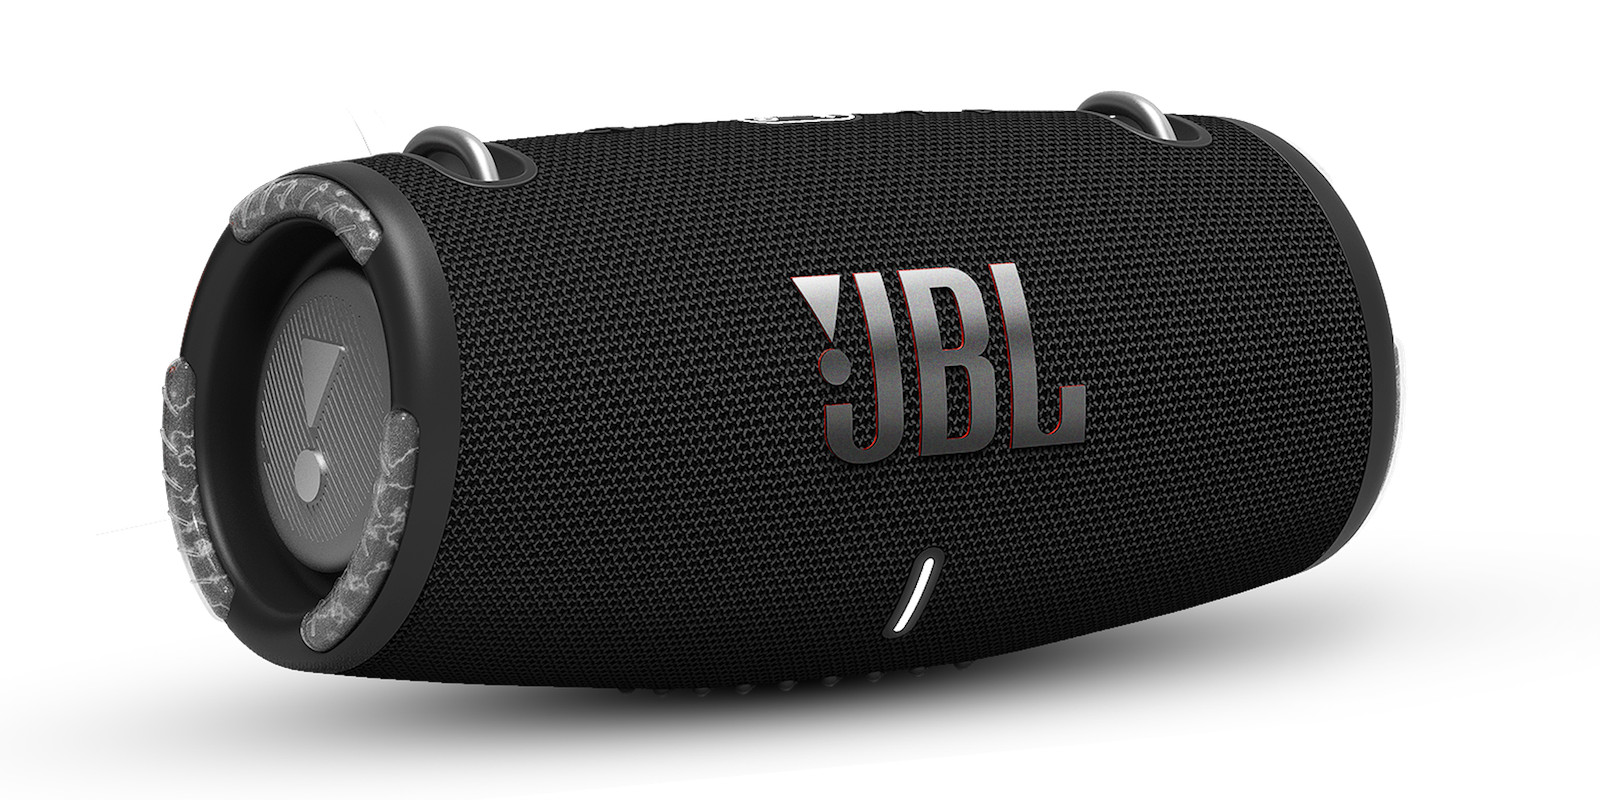 New JBL speakers + truly wireless headphones unveiled today 9to5Toys